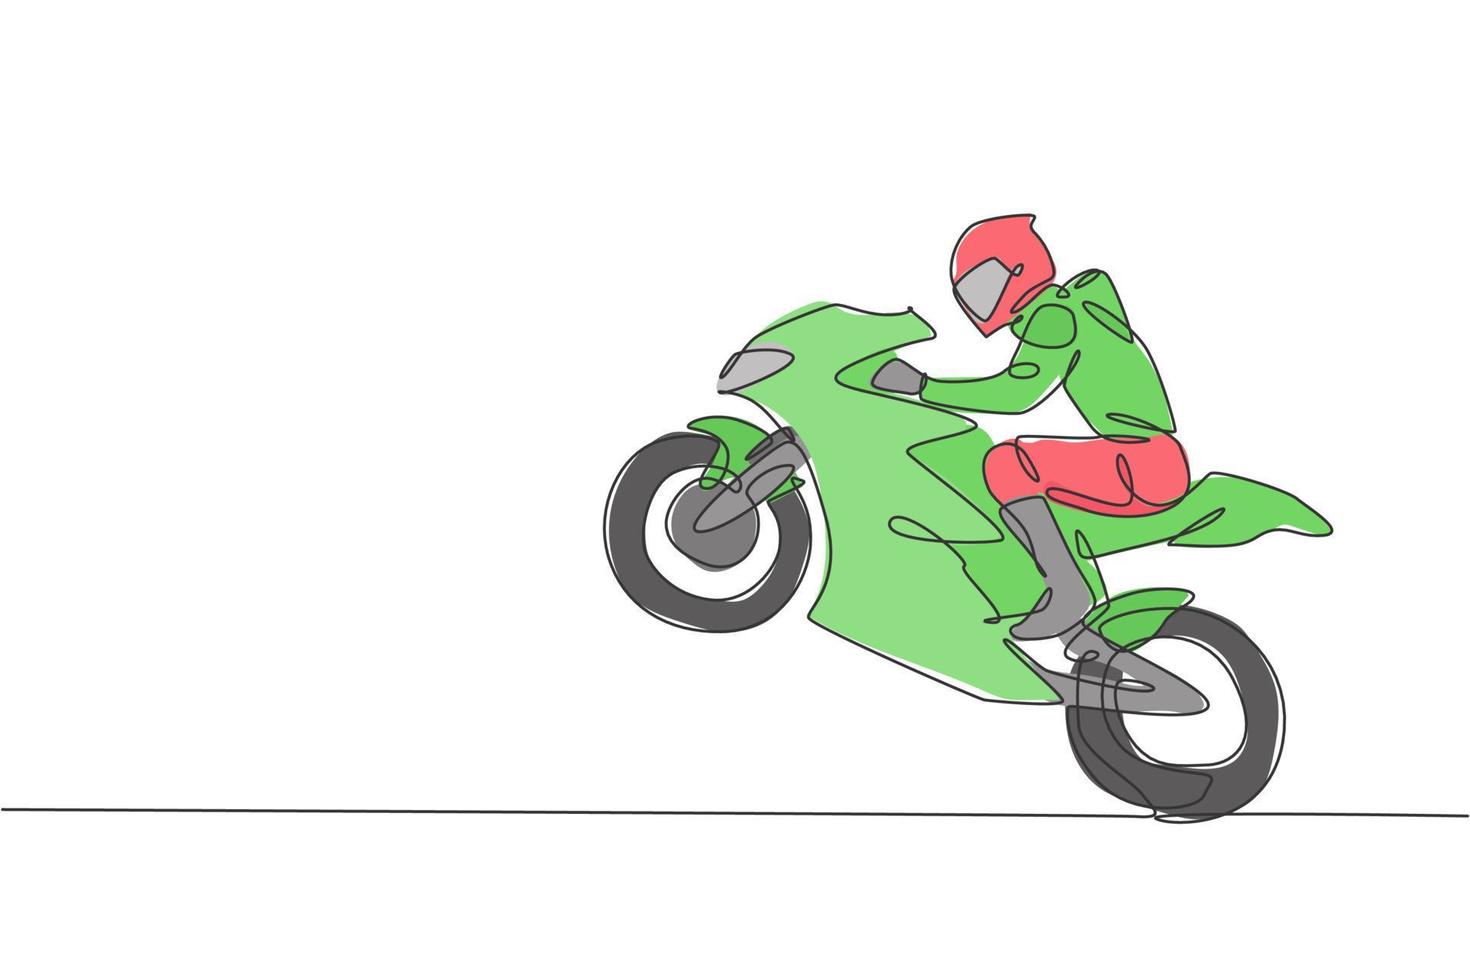 One single line drawing of young moto racer jumping his motorcycle to celebrate winning vector illustration. Superbike racing concept. Modern continuous line draw design for motor racer event banner